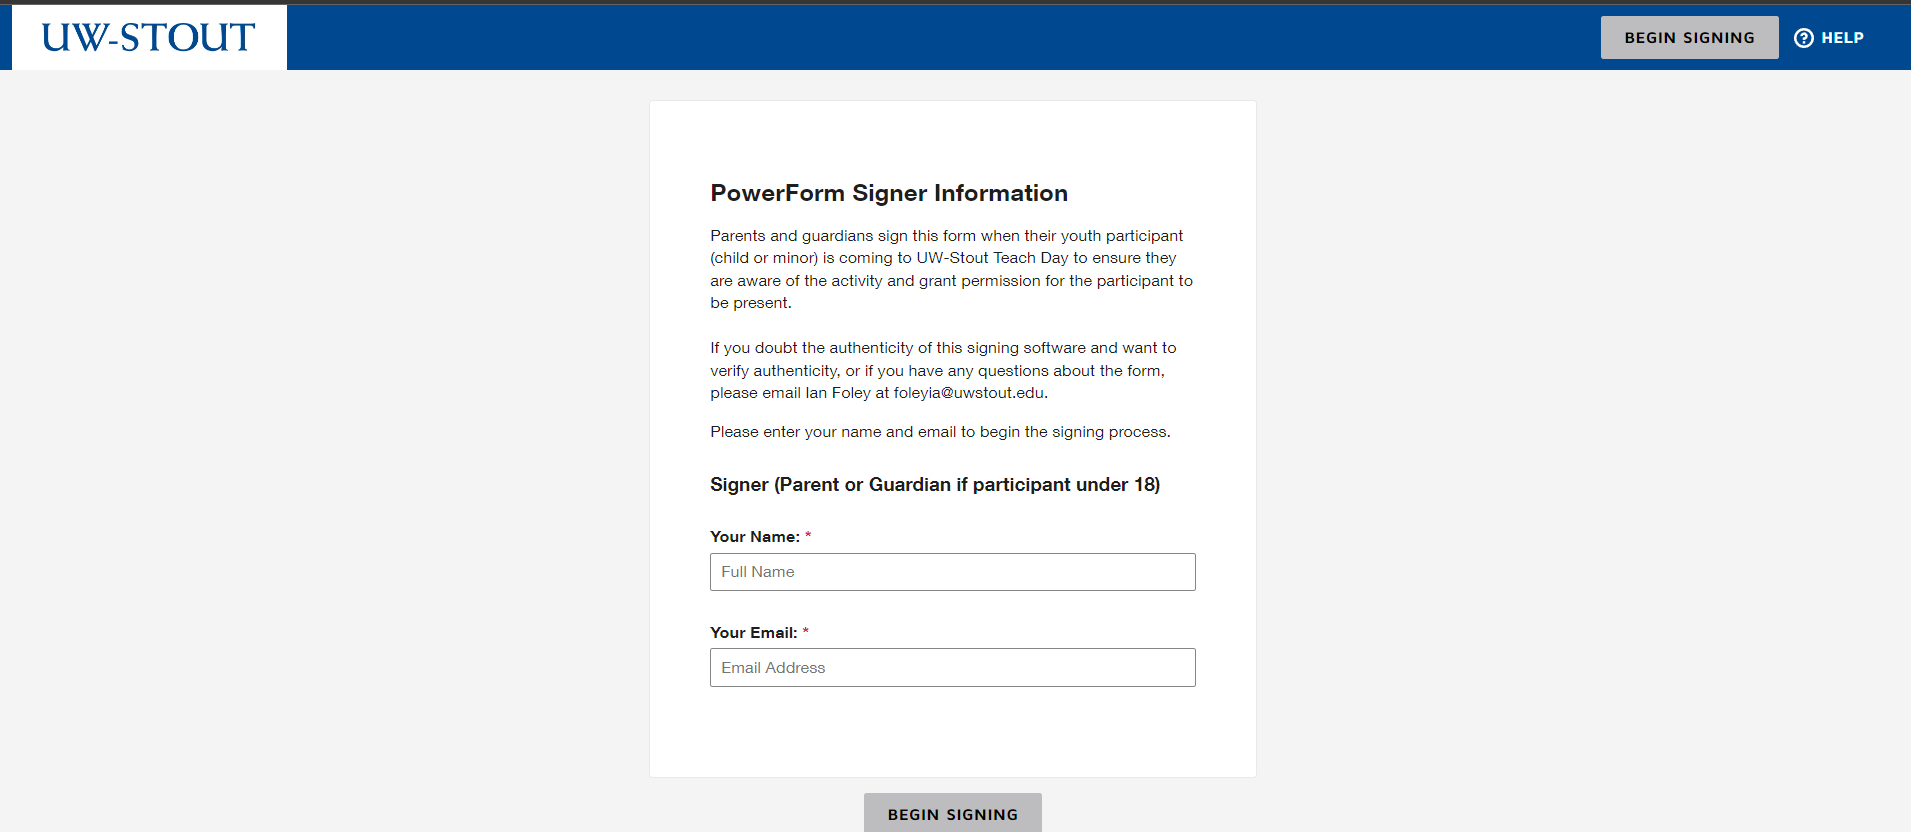 Docusign portal to sign the adobe docusign permission form.